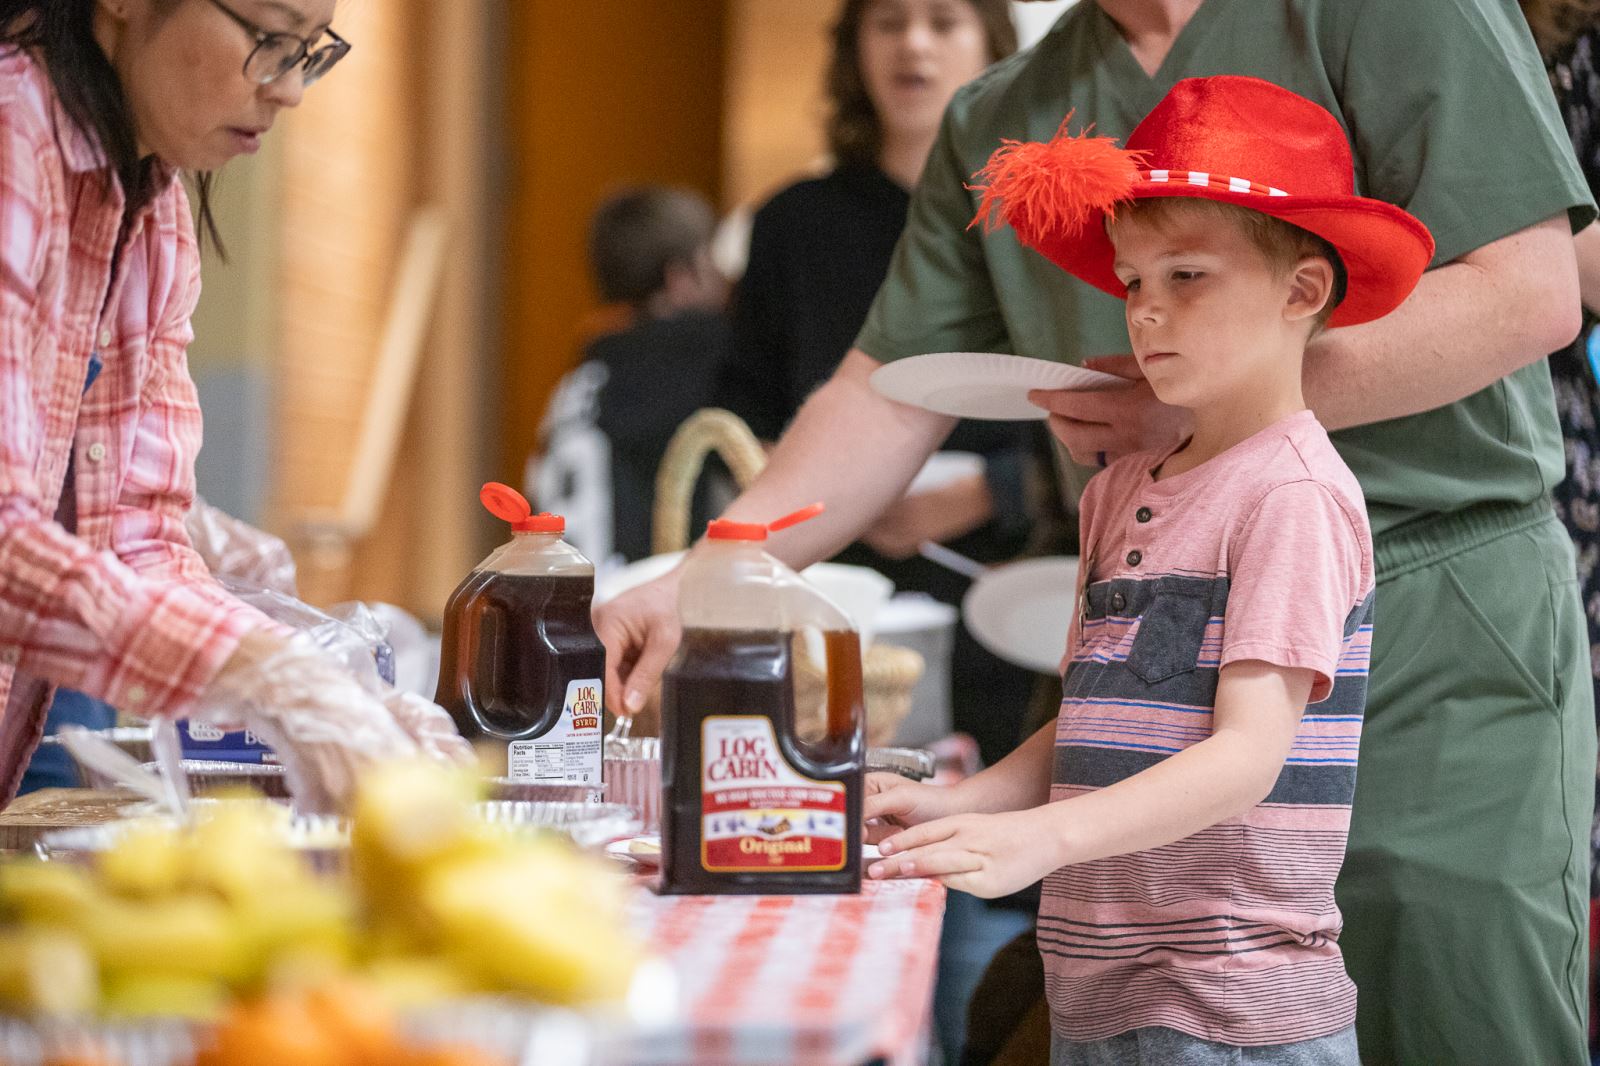 A staff member serves up pancakes to a little boy in a red cowboy hat